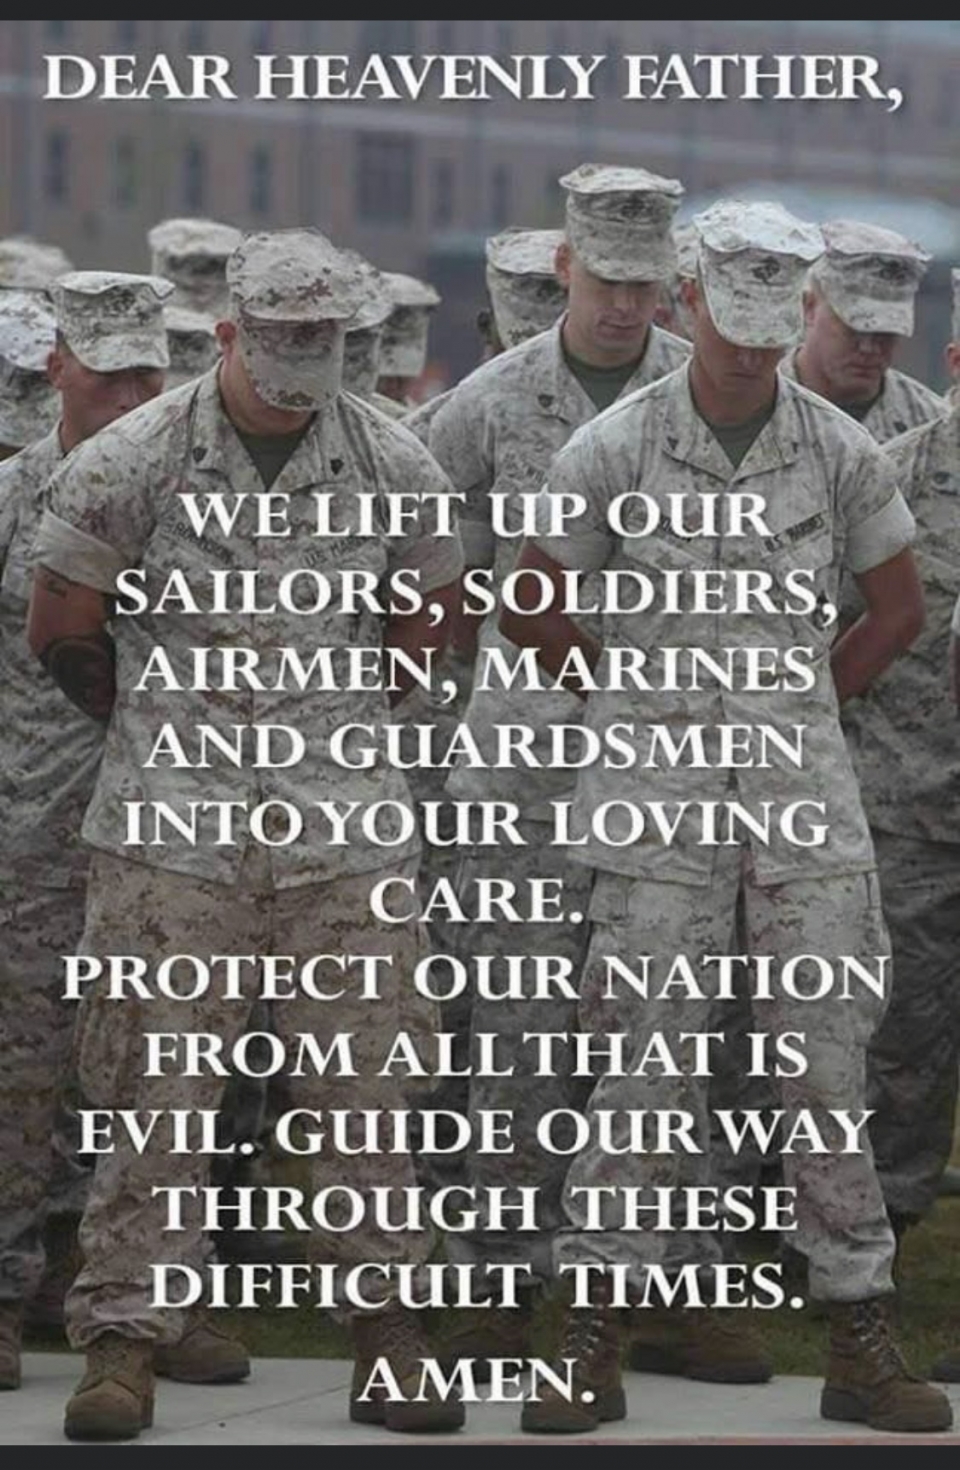 Giving thanks and prayers for our US active military and veterans.